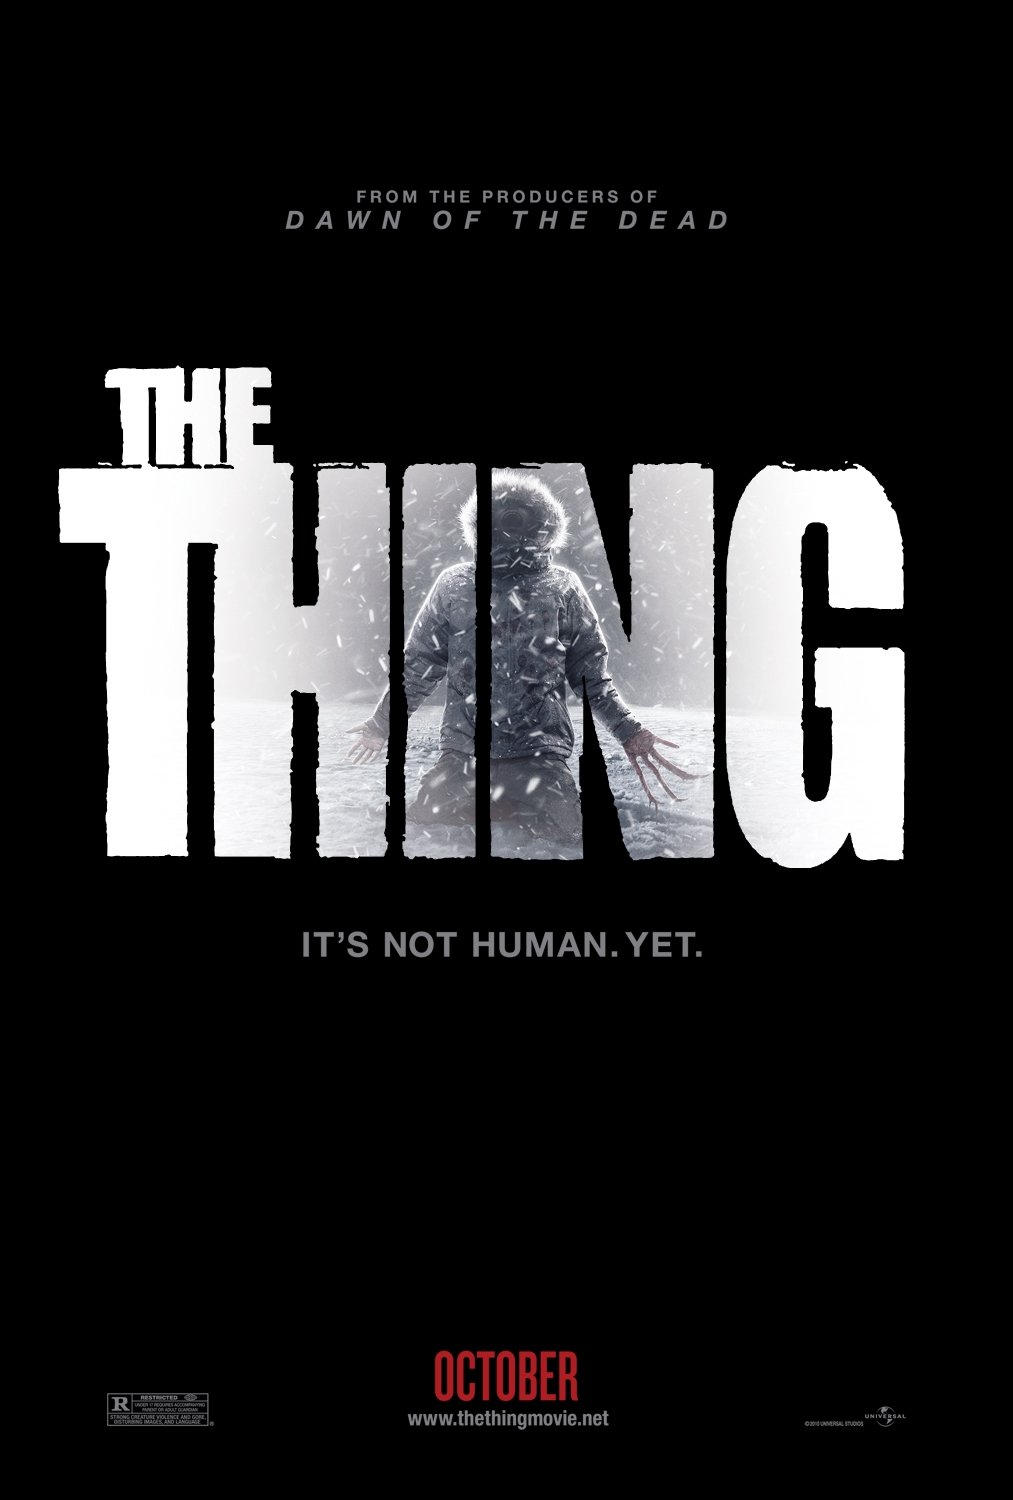 No Frame Details about   The Thing Horror Movie Art Poster 